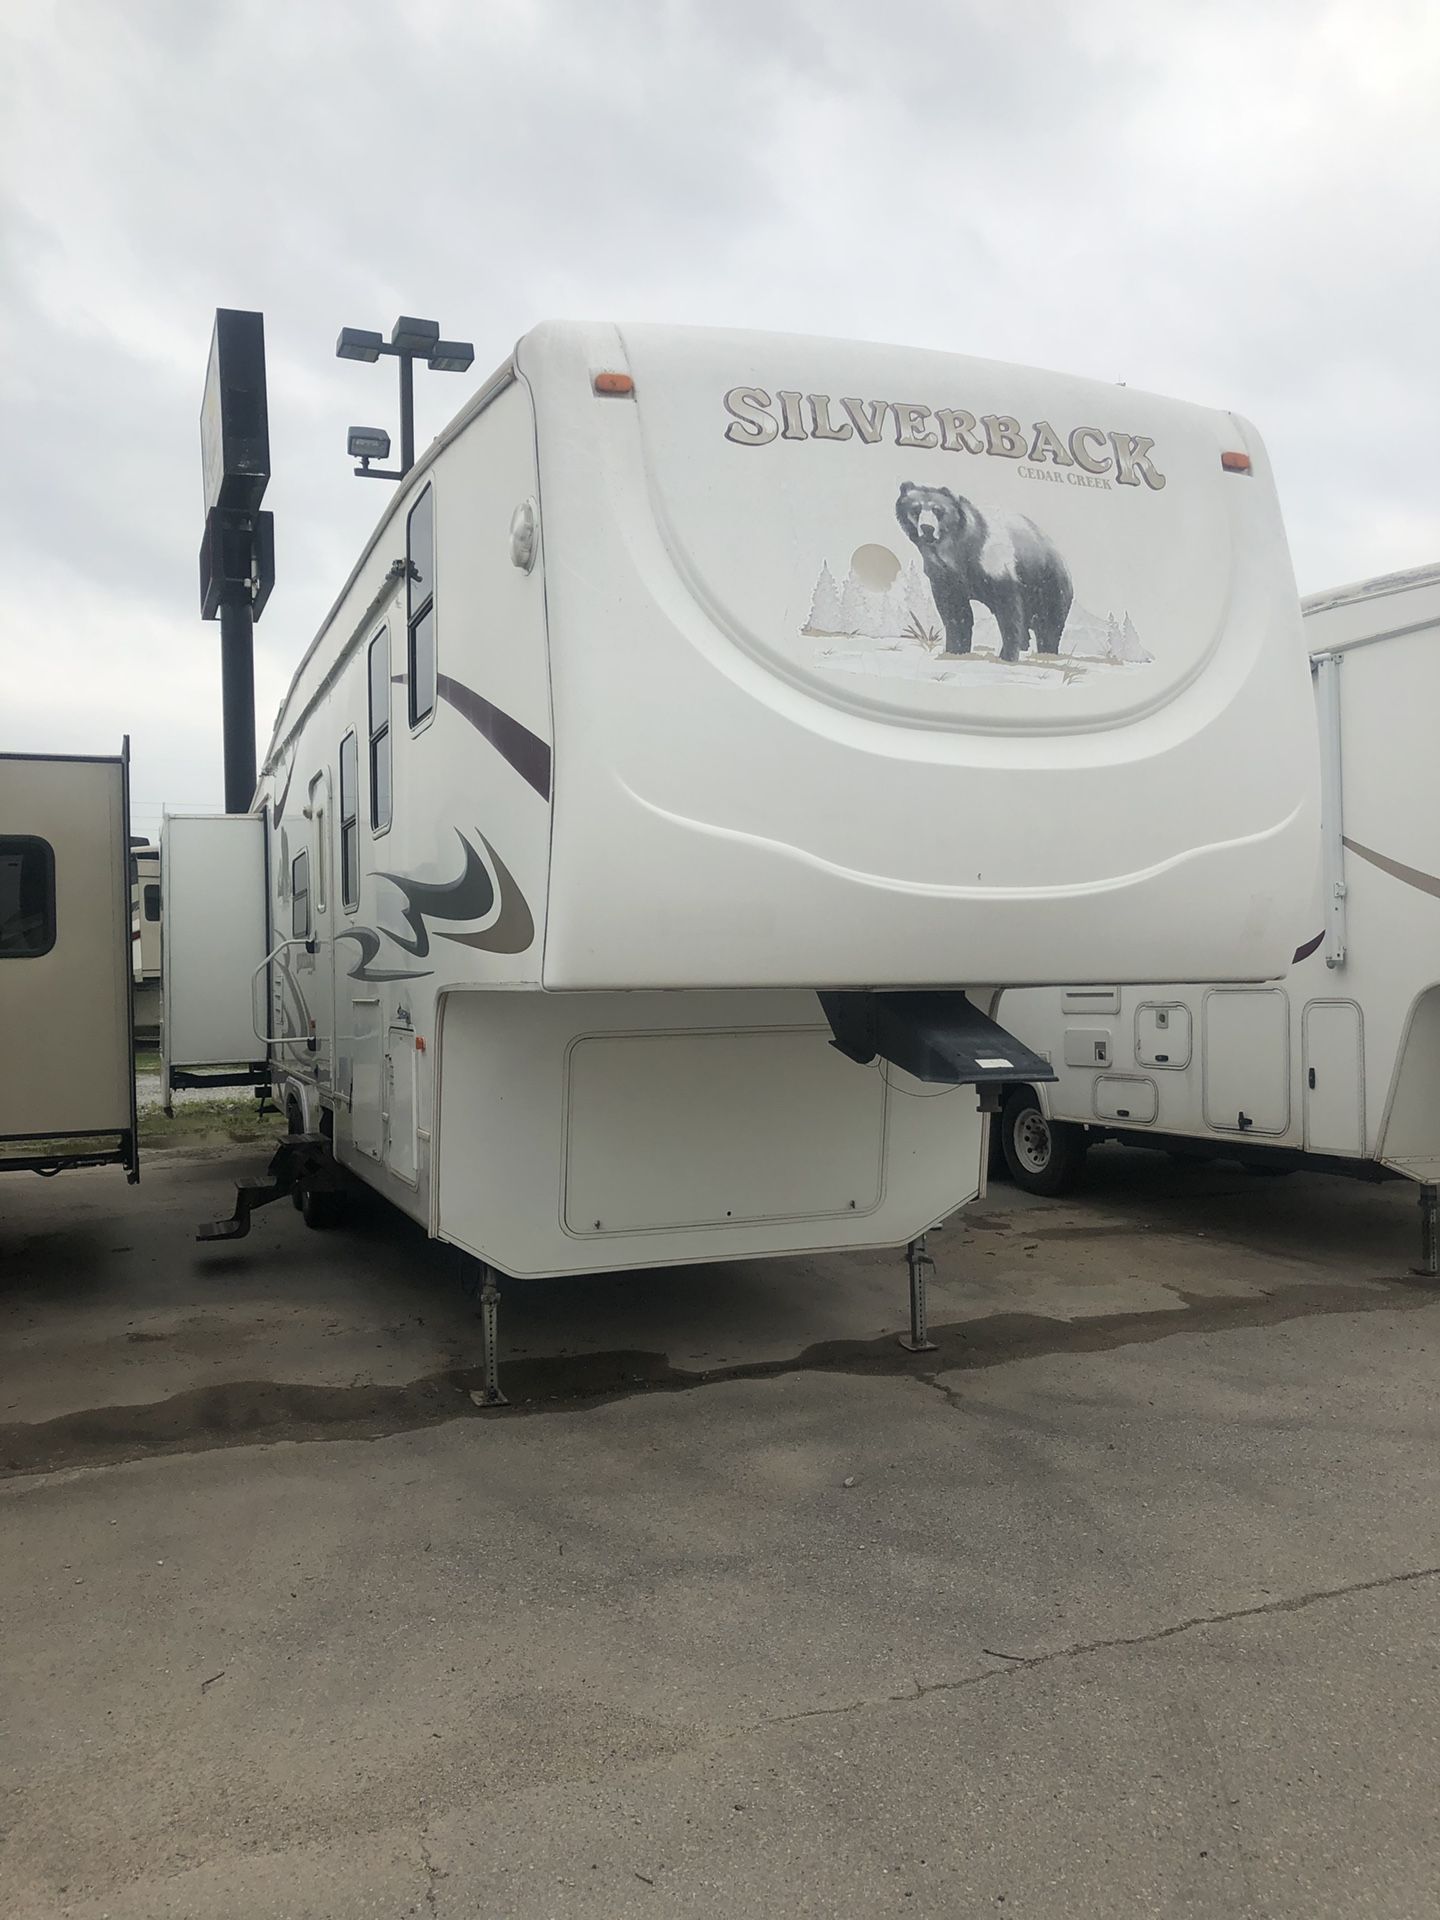 Silverback bunkhouse fifth wheel trailer camper with bunks